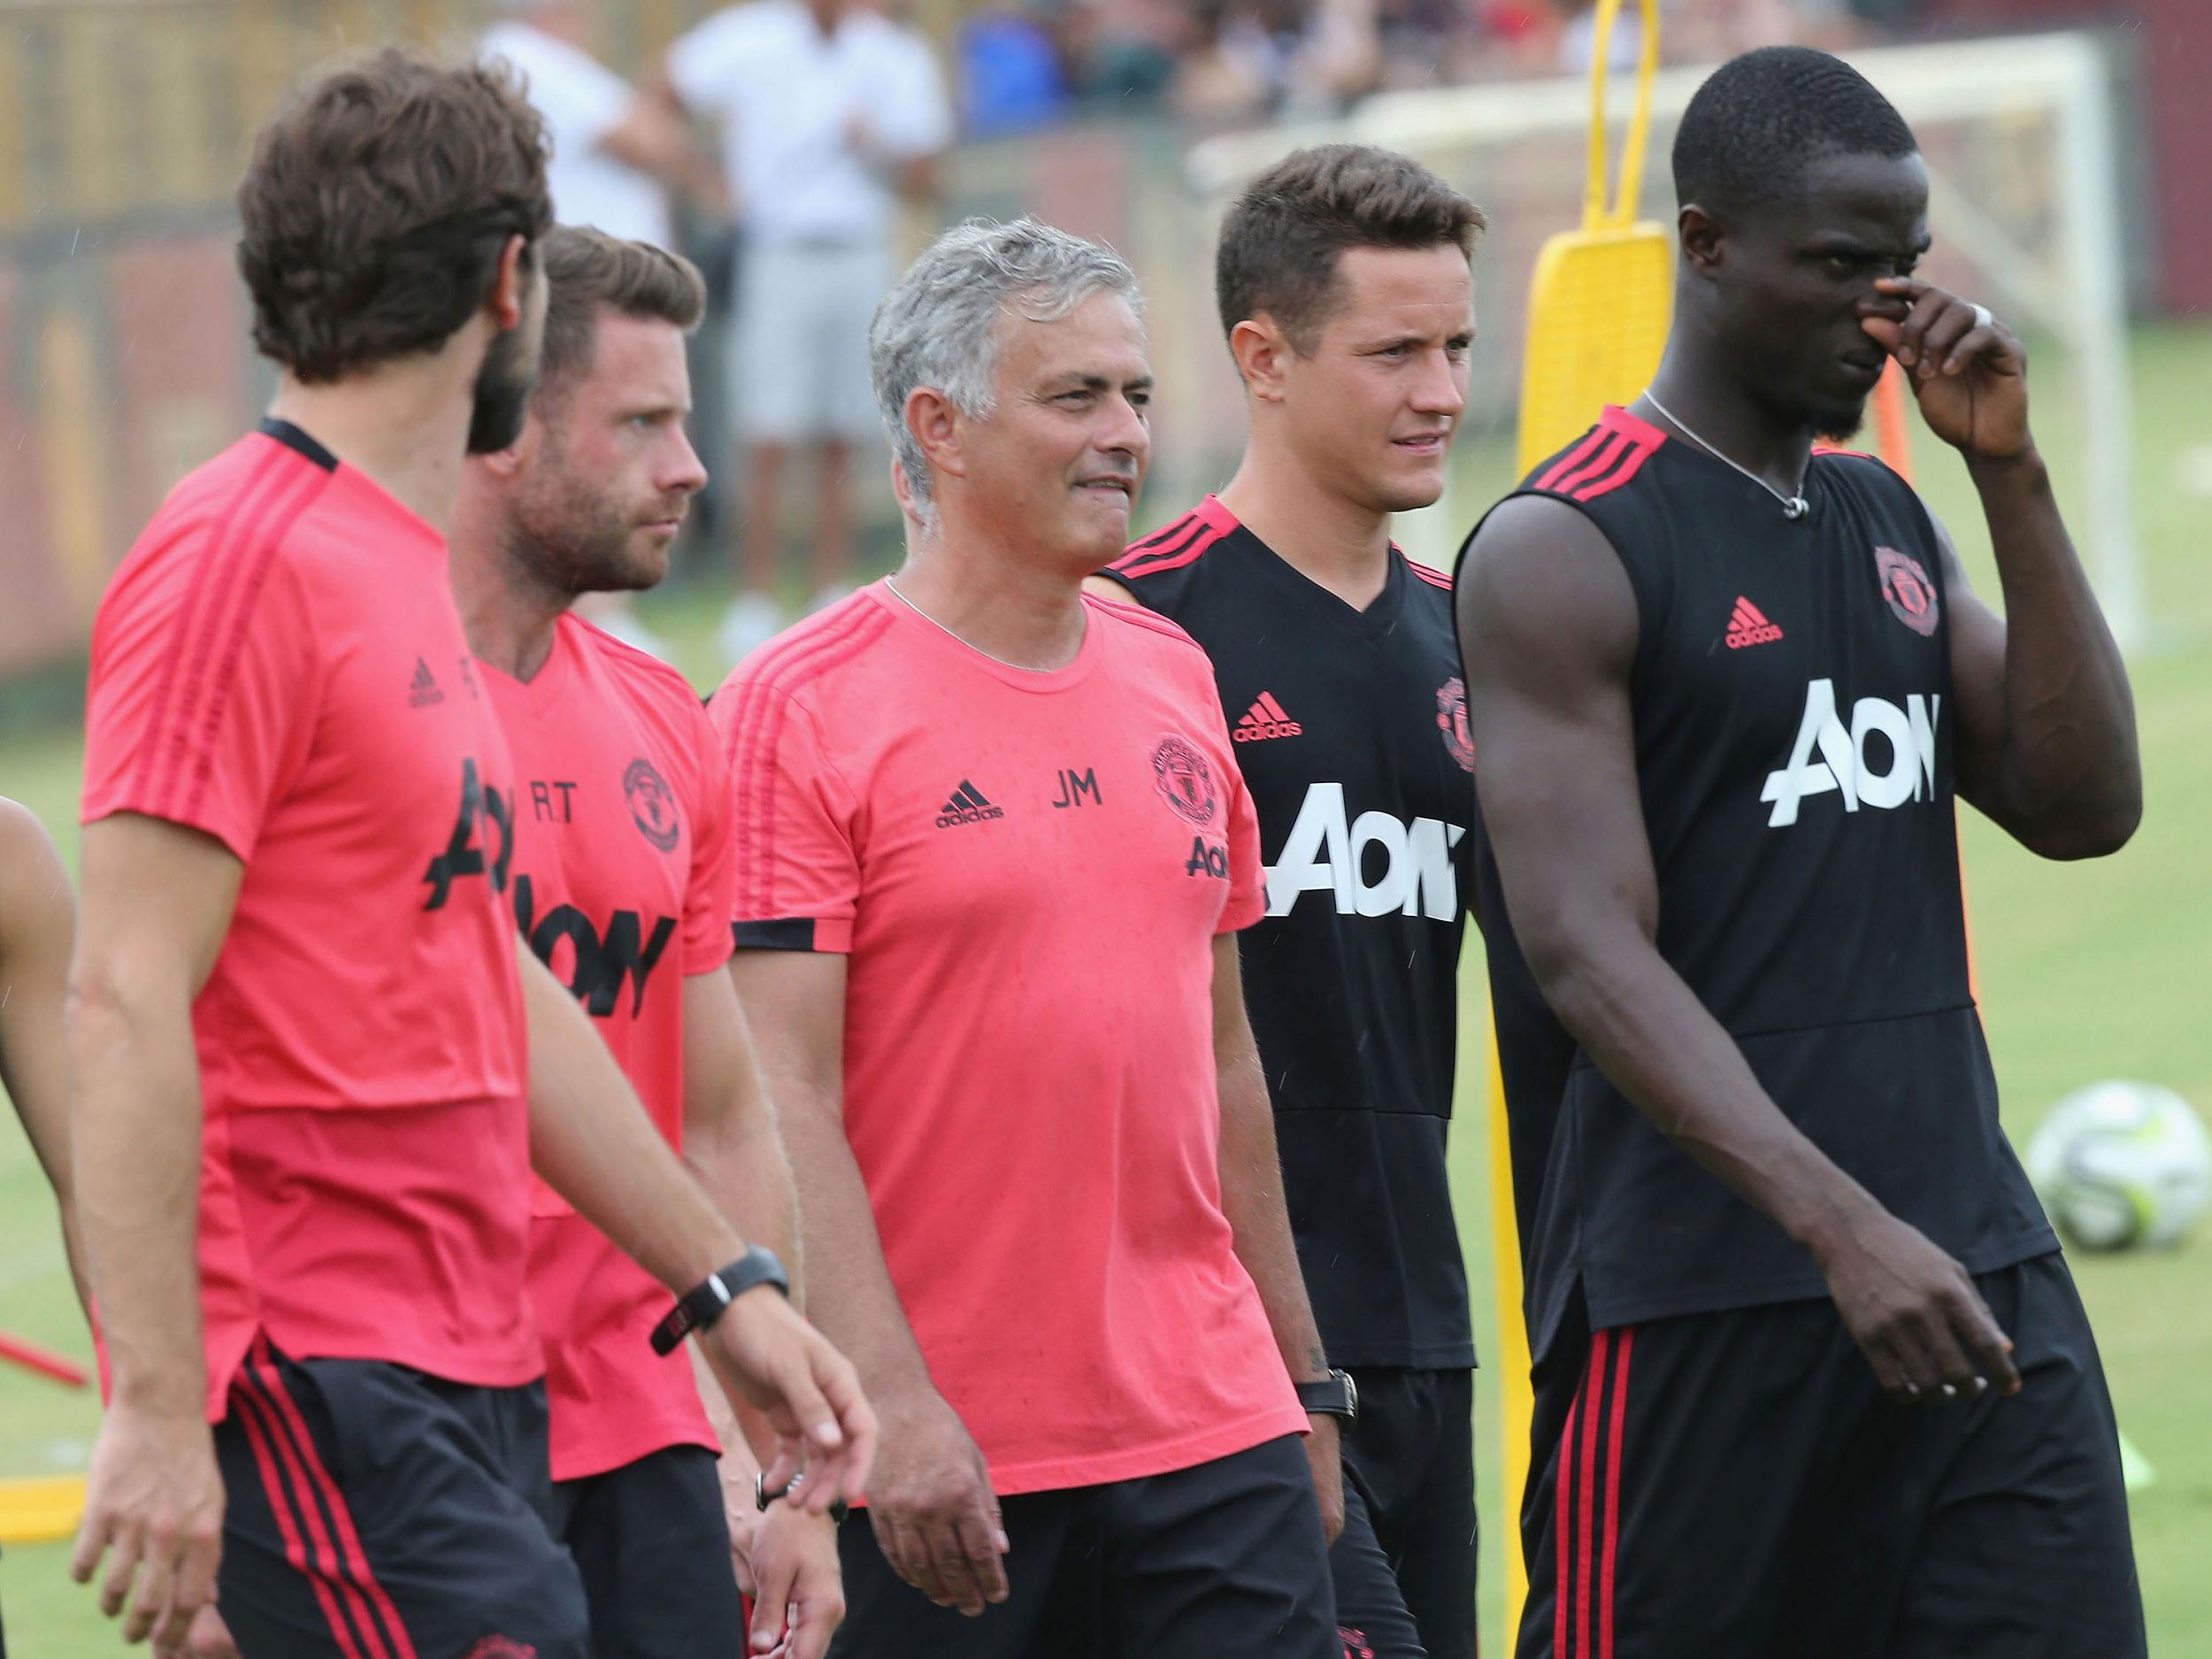 Manchester United's pre-season tour of the United States has been a testing one